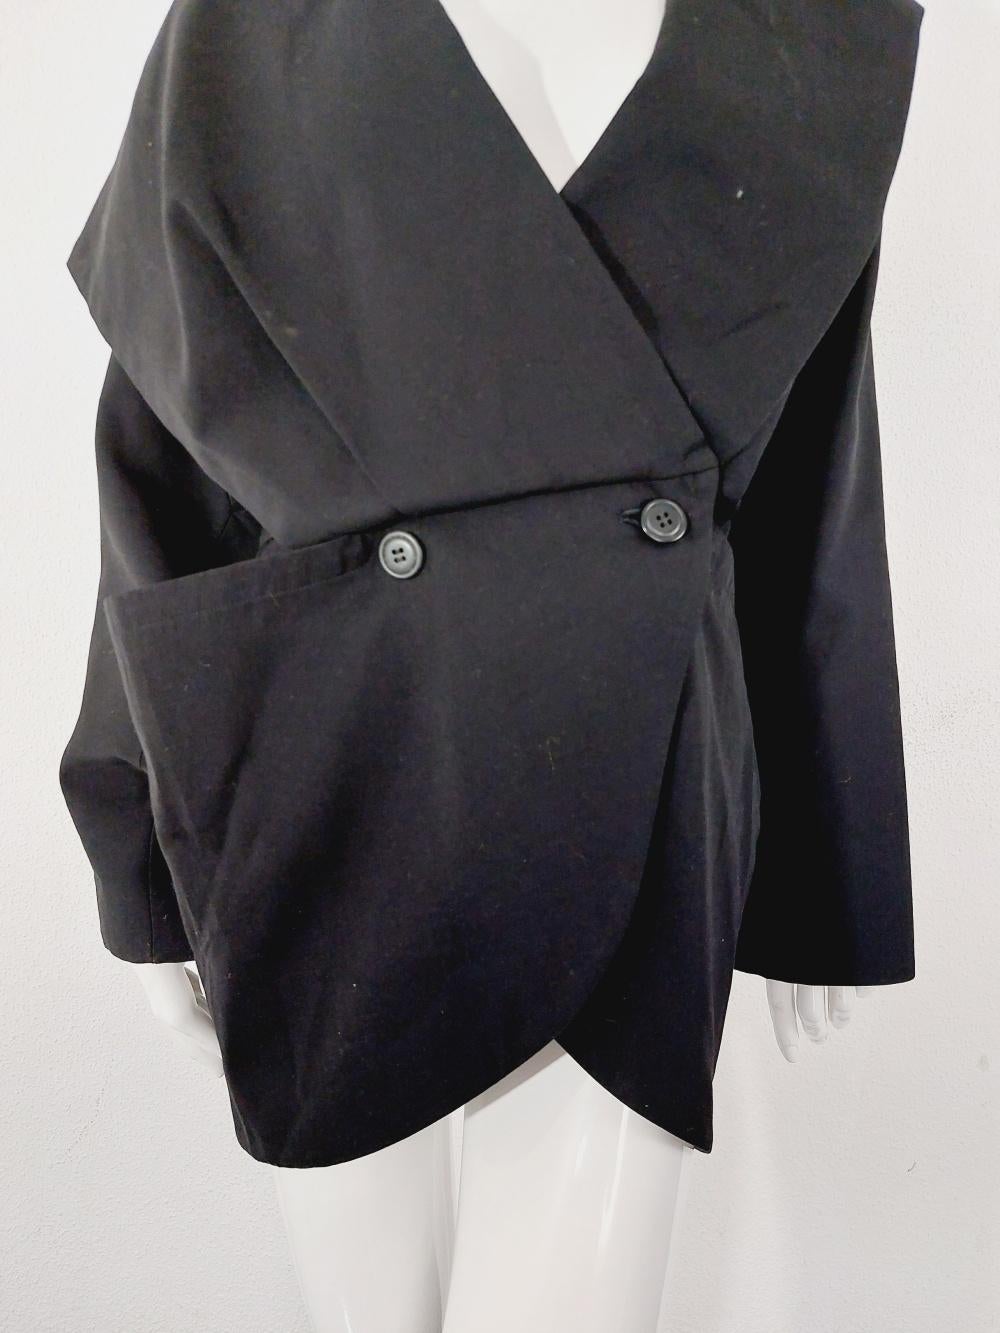 Women's Issey Miyake Exaggerated Dramatic Asymmetric Silhouette Formal Coat Jacket For Sale